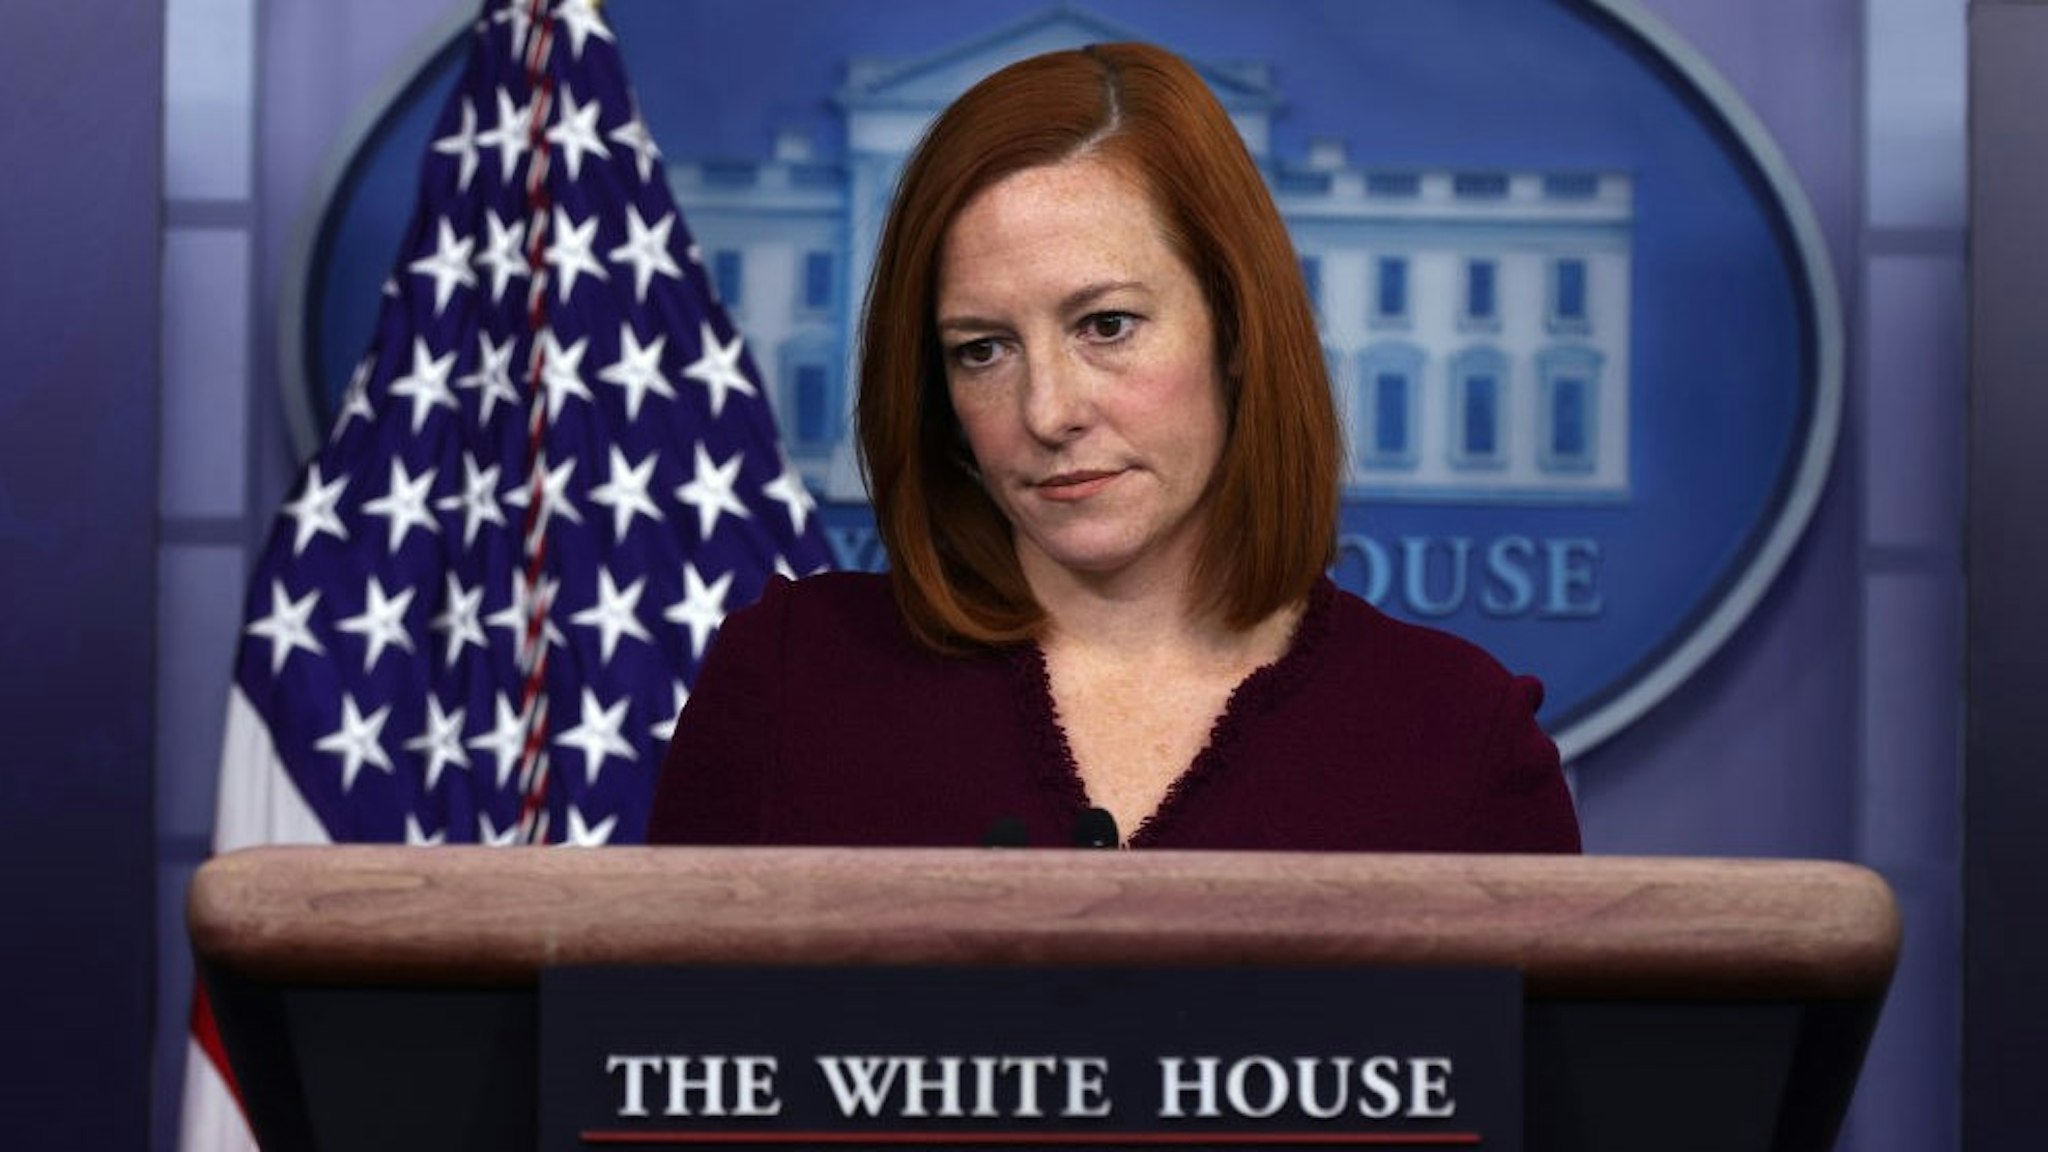 WASHINGTON, DC - FEBRUARY 09: White House Press Secretary Jen Psaki listens during a news briefing at the James Brady Press Briefing Room of the White House February 9, 2021 in Washington, DC. Psaki held a news briefing to answers questions from the members of the press. (Photo by